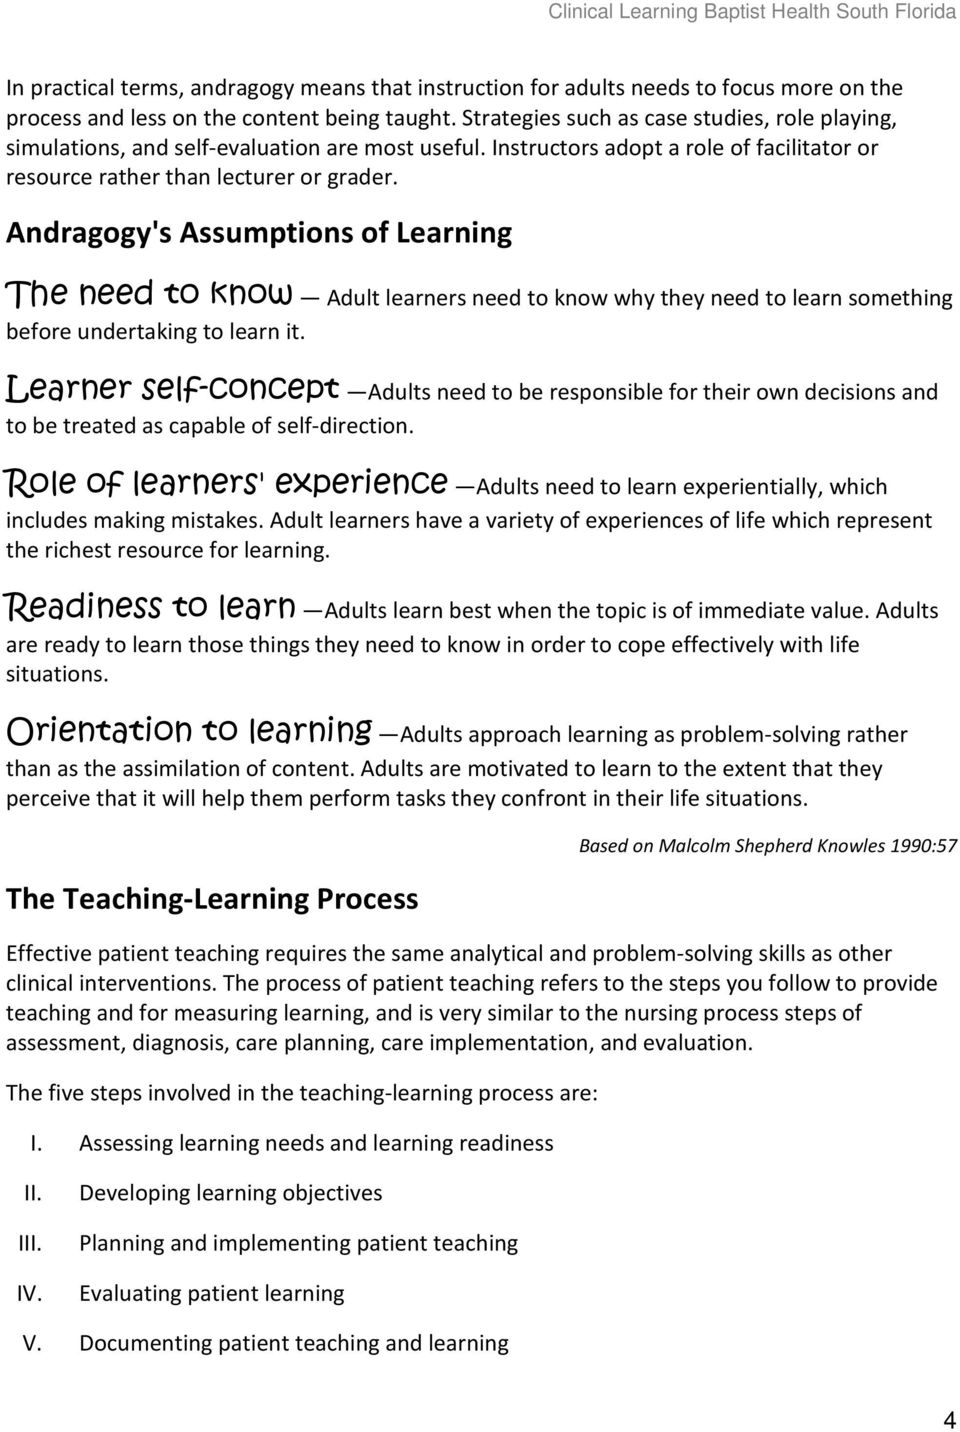 Andragogy's Assumptions of Learning The need to know Adult learners need to know why they need to learn something before undertaking to learn it.